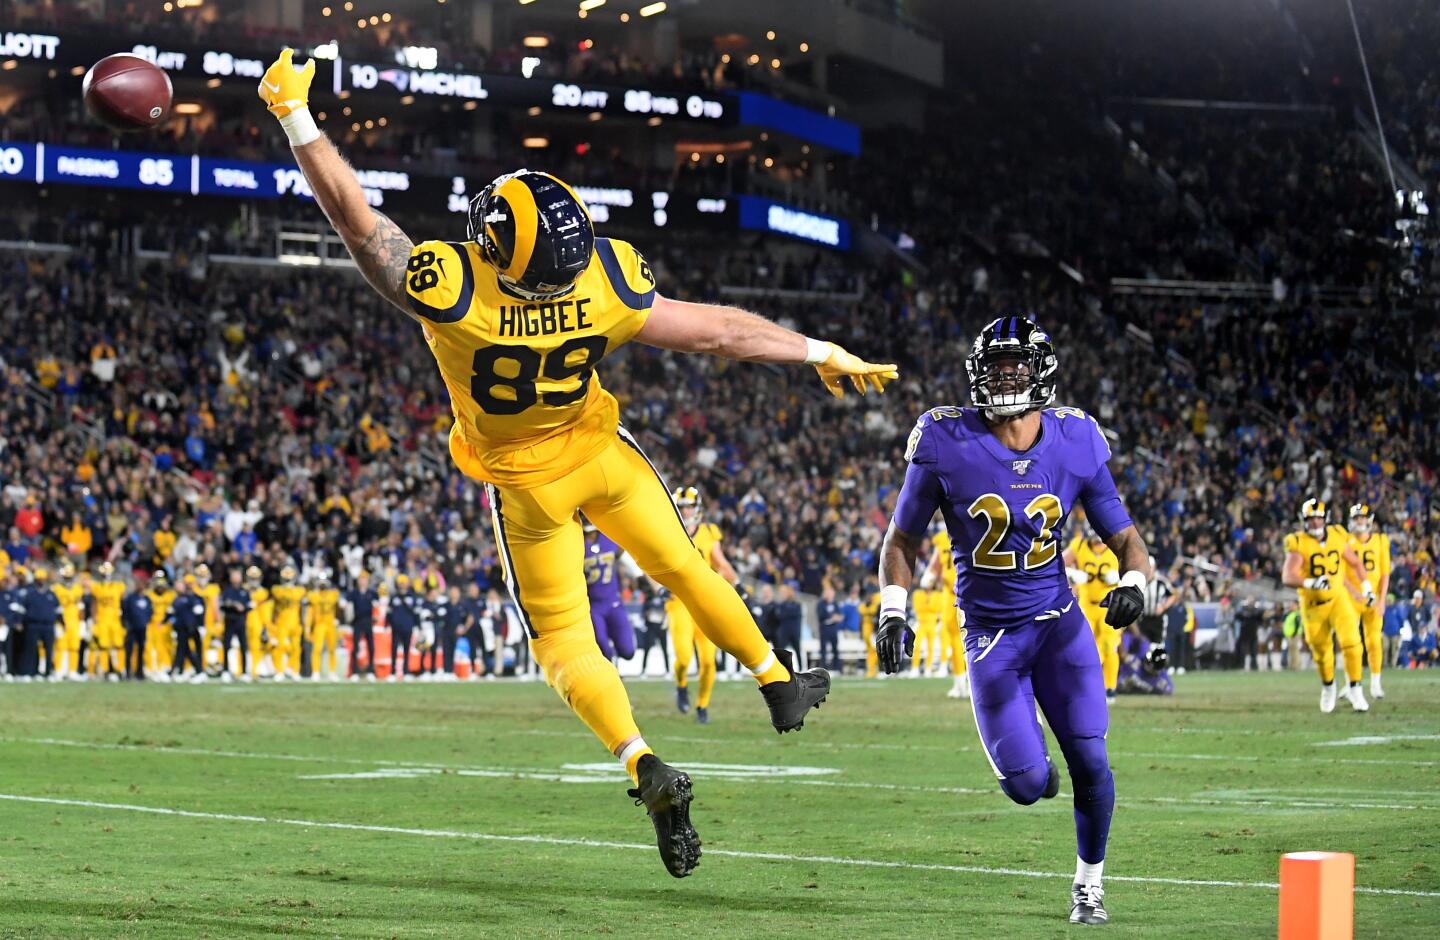 Rams tight end Tyler Higbee can't make the catch in the end zone in front of Ravens cornerback Jimmy Smith during the second quarter of a game Nov. 25 at the Coliseum.